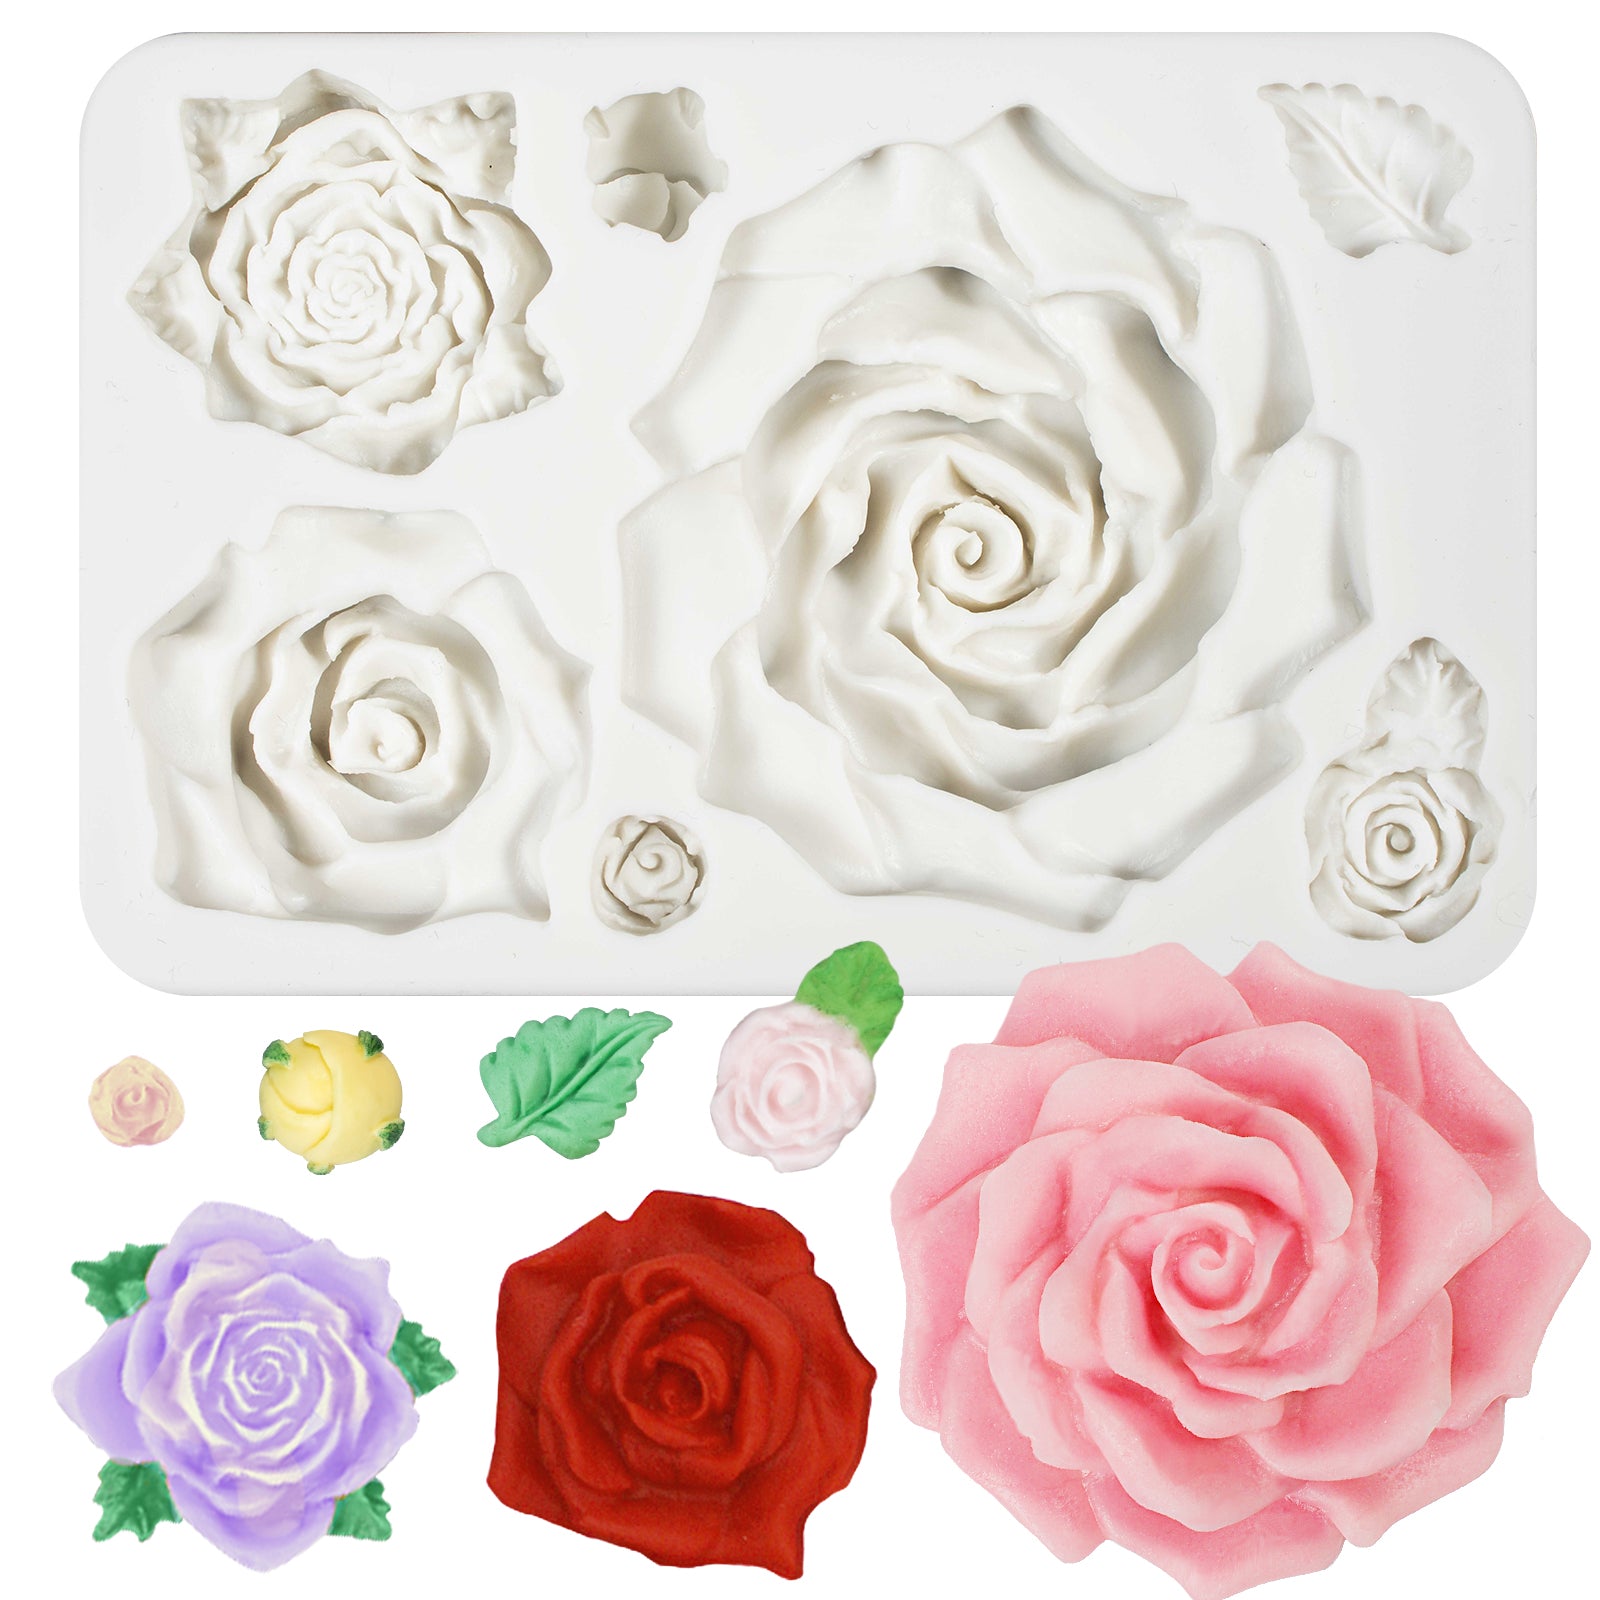 Funshowcase Assorted Blooming Roses Fondant Silicone Mold